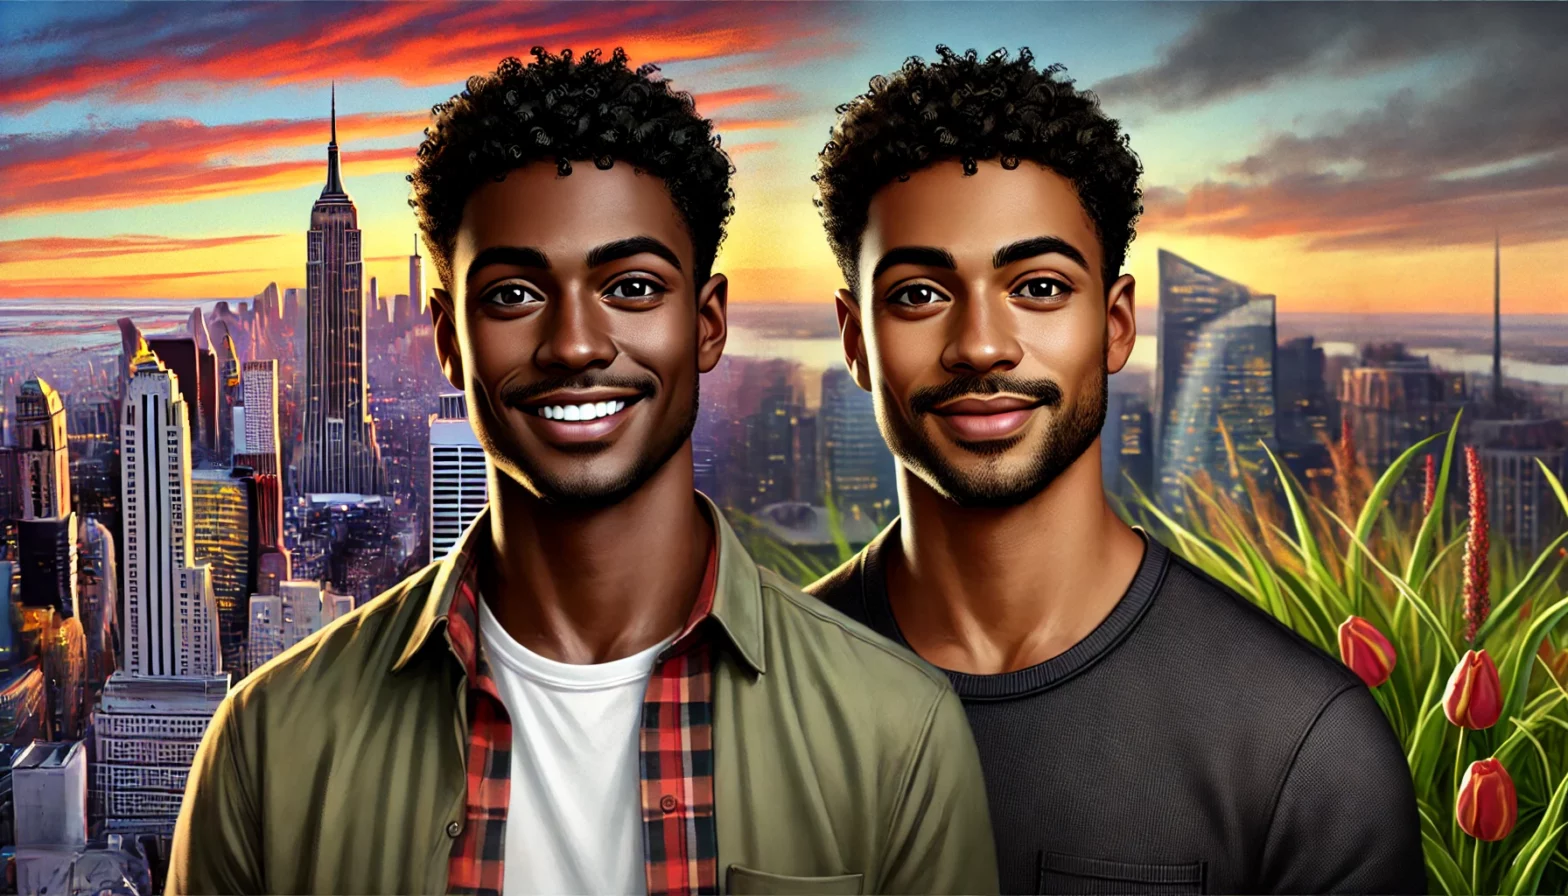 A friendly portrait of Steve, a Black man with short curly hair and a welcoming smile, standing against a vibrant sunset cityscape background.